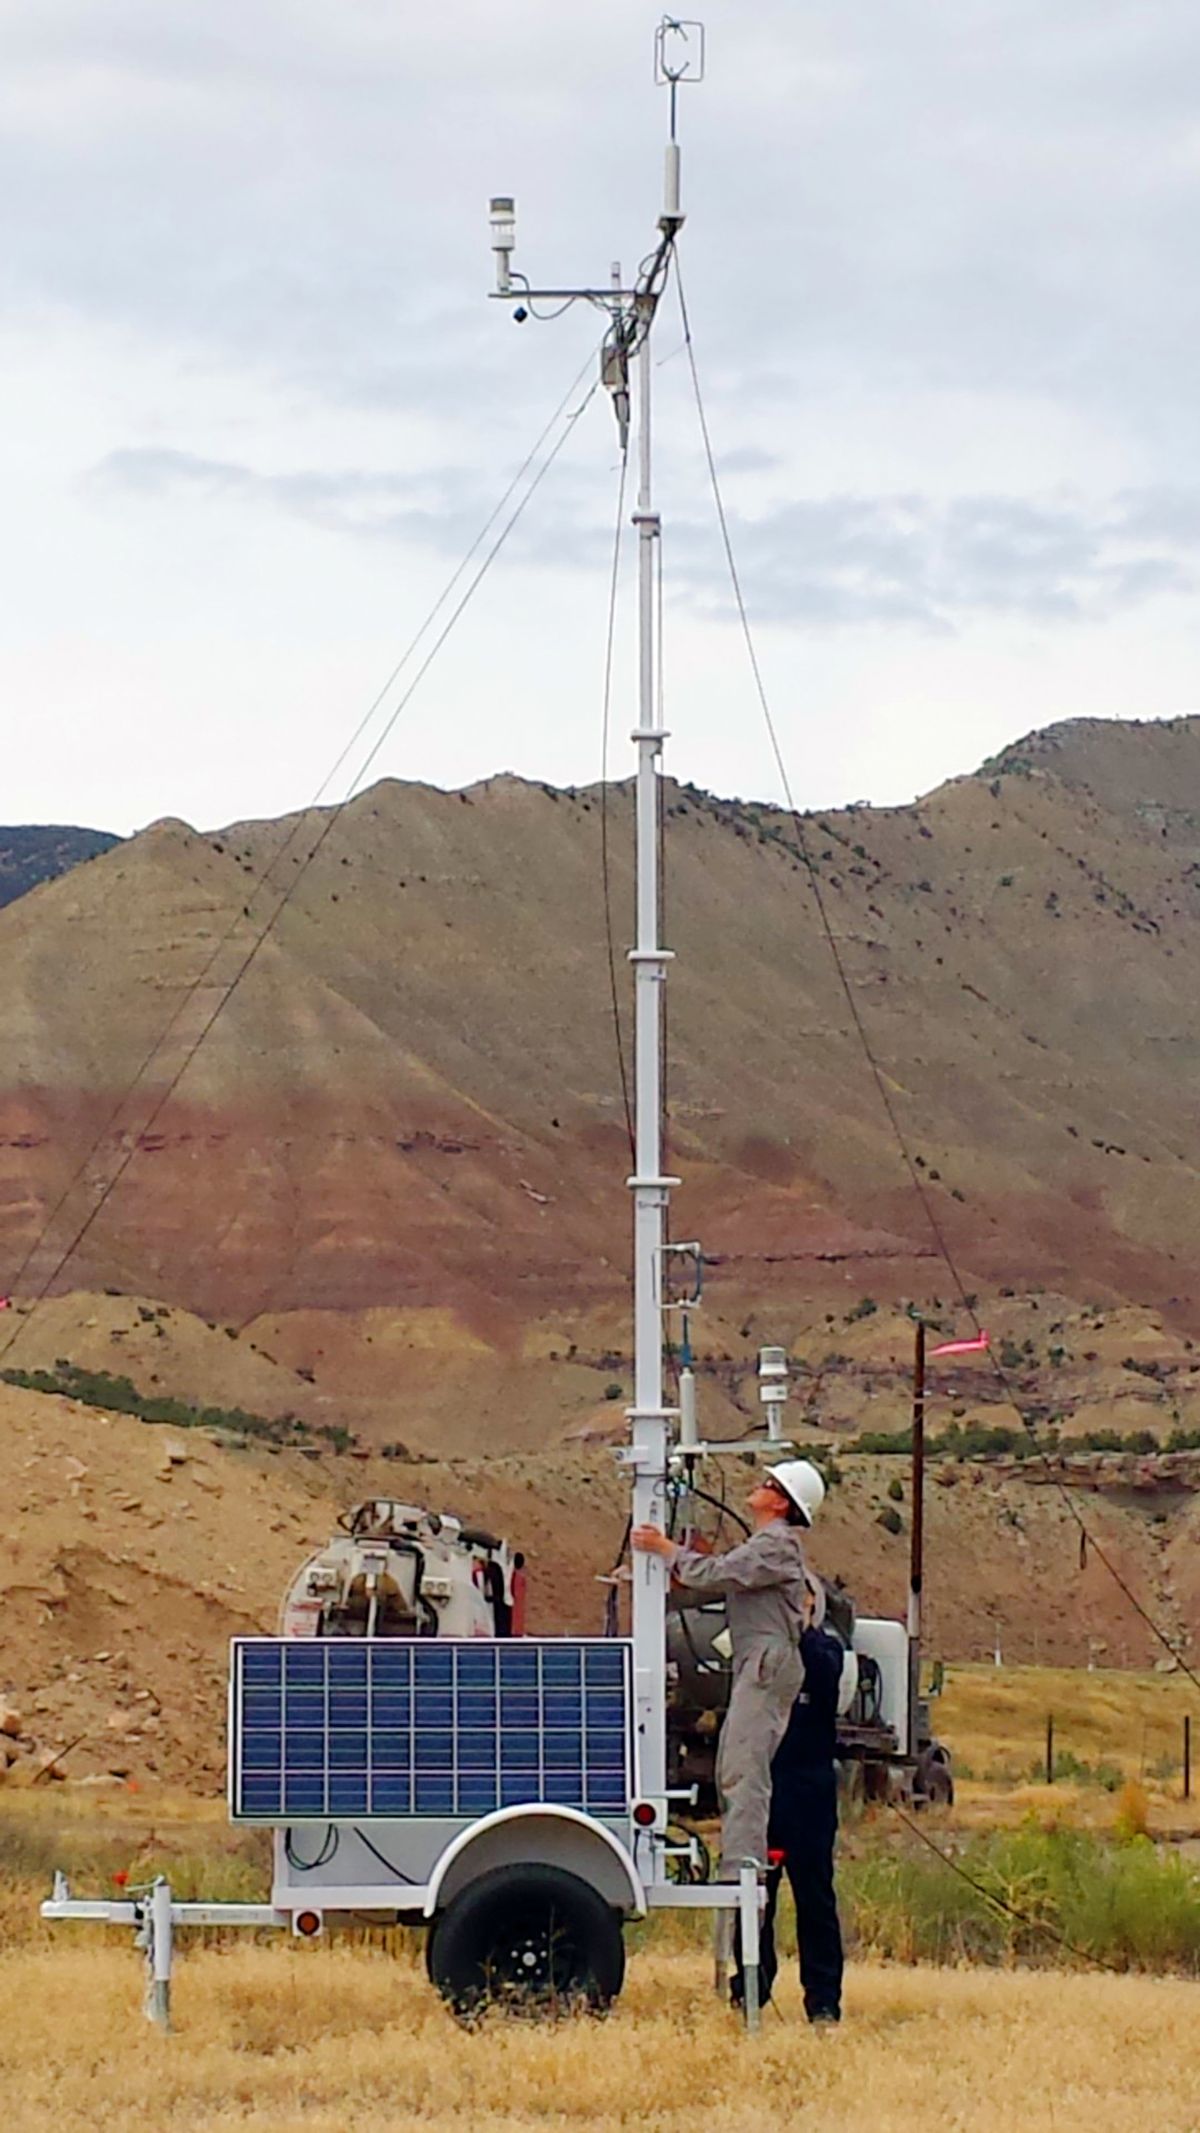 In this 2014 photo provided by Colorado State University, CSU research associate Kira Shonkwiler, front, and student Landan MacDonald, standing behind Shonkwiler, set up a weather station in Garfield County, Colo., as part of a study on air pollution from fracking wells.  (AP)